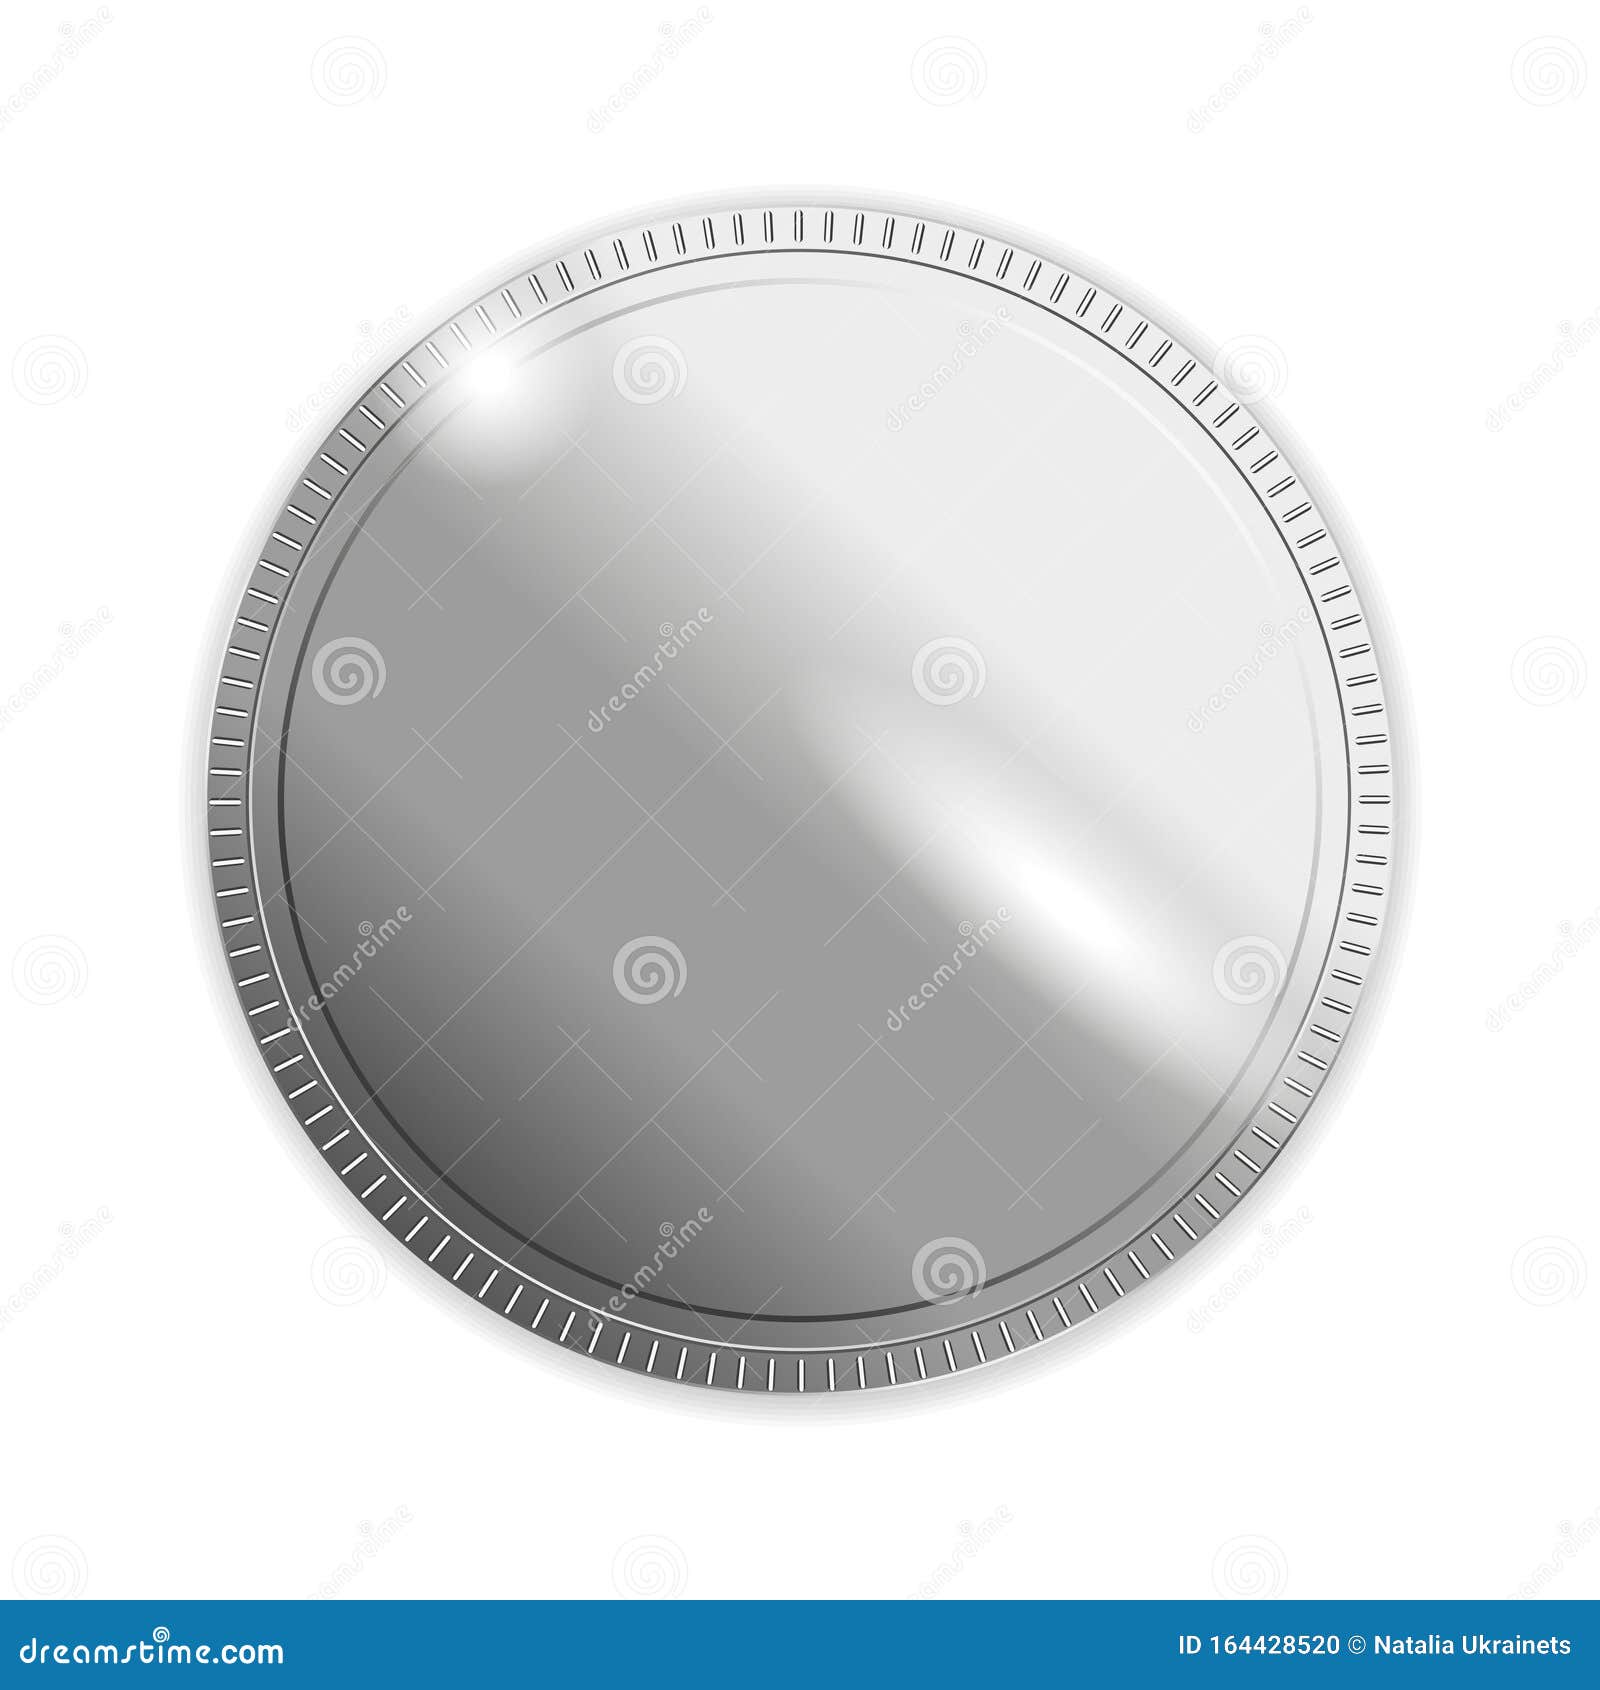 Empty silver coin sign stock vector. Illustration of coin - 164428520